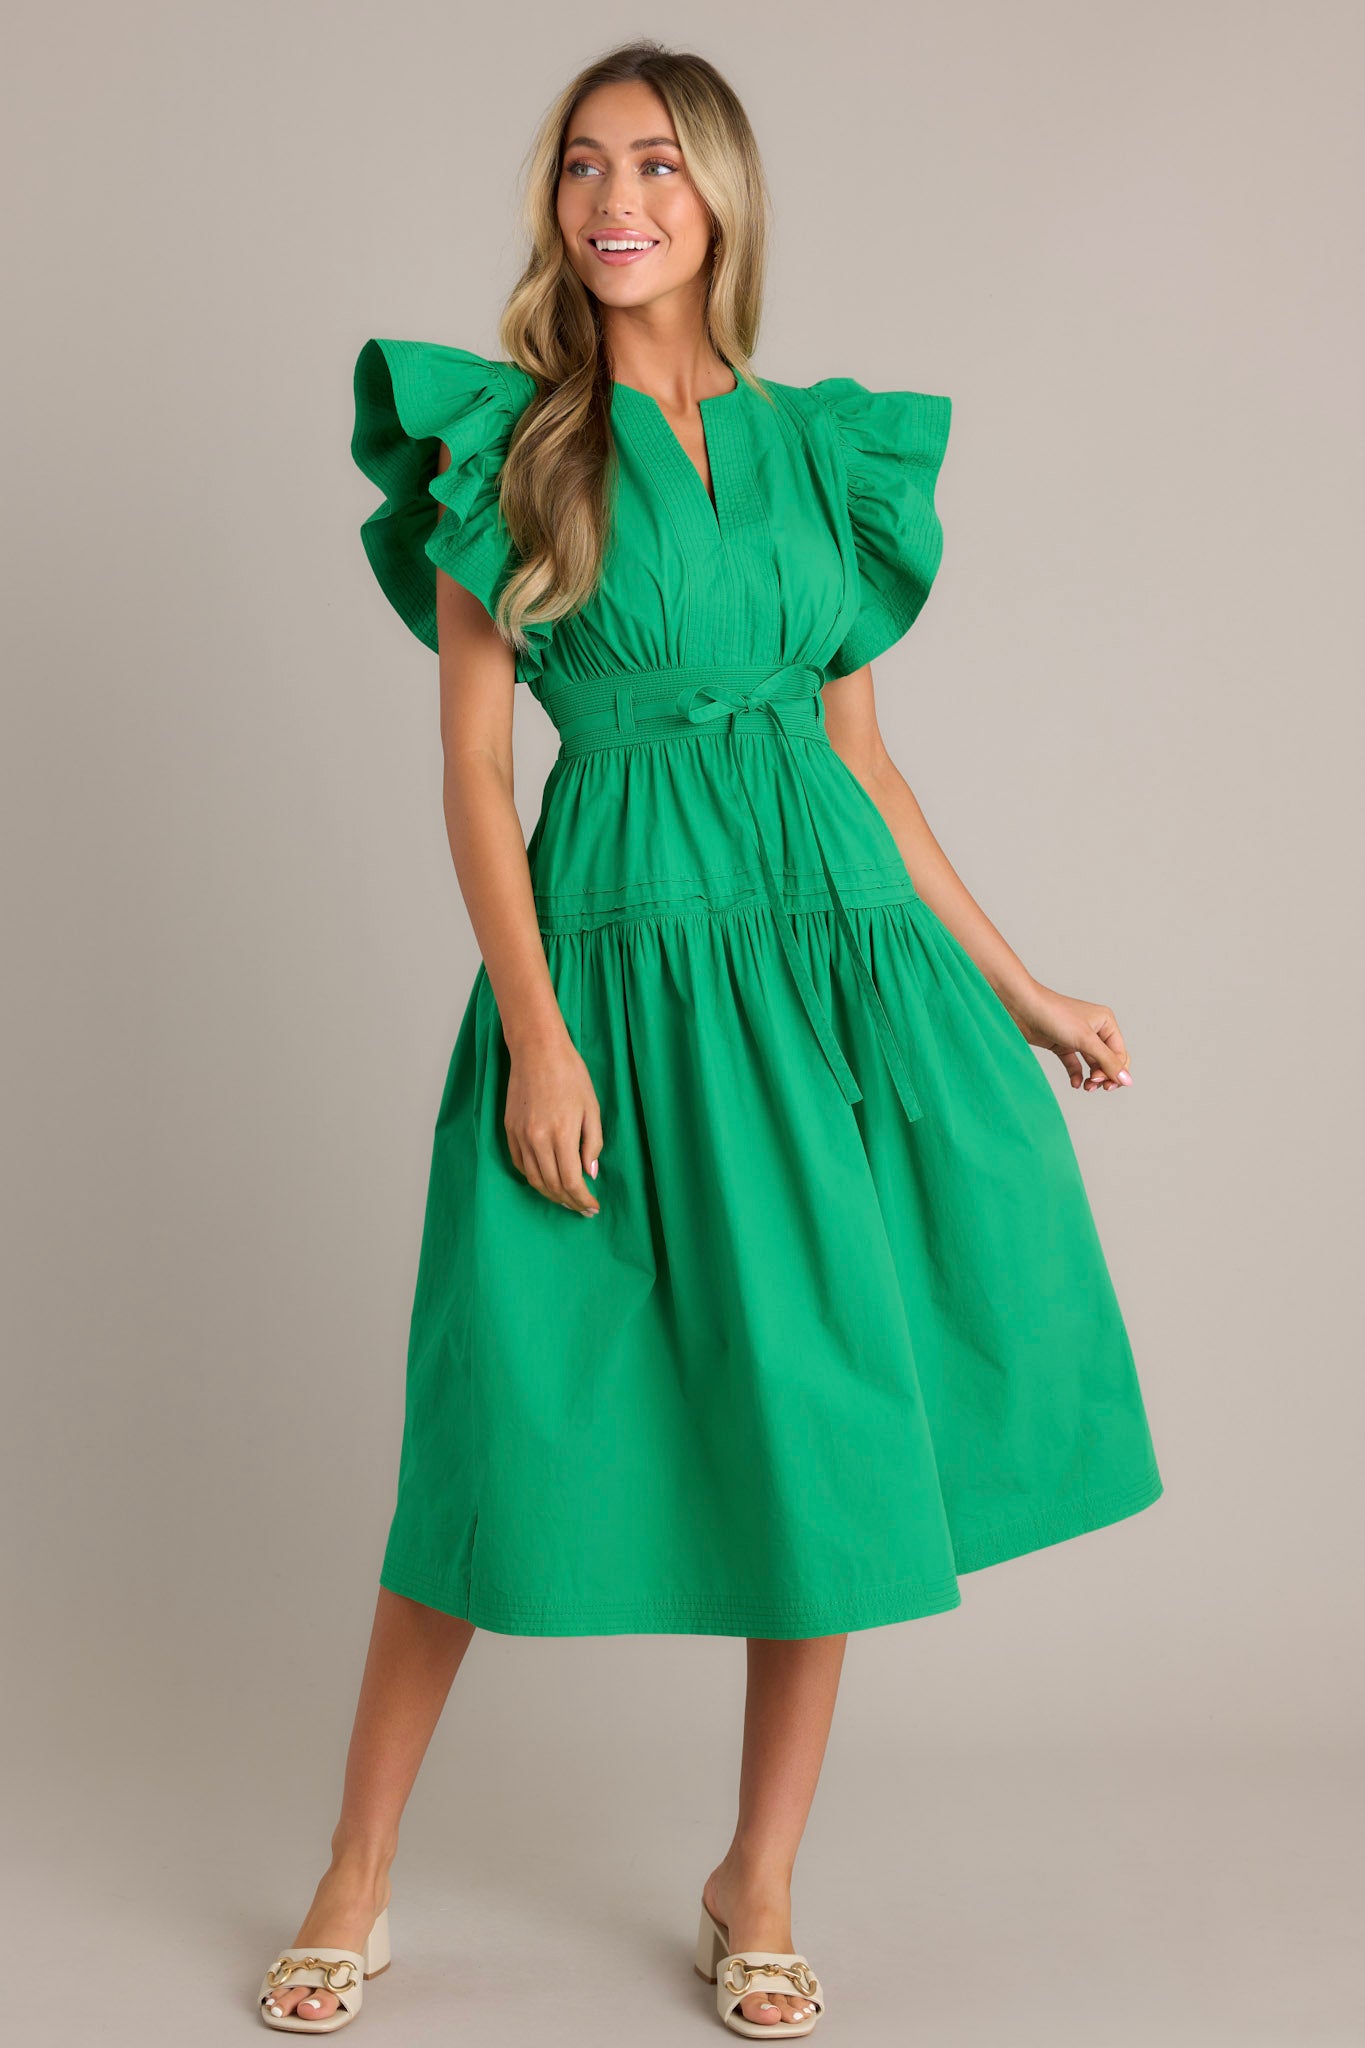 Action shot of a green midi dress highlighting the v-neckline, thick waistband with a self-tie belt, functional hip pockets, and ruffled short sleeves, showcasing the flow and movement of the dress.